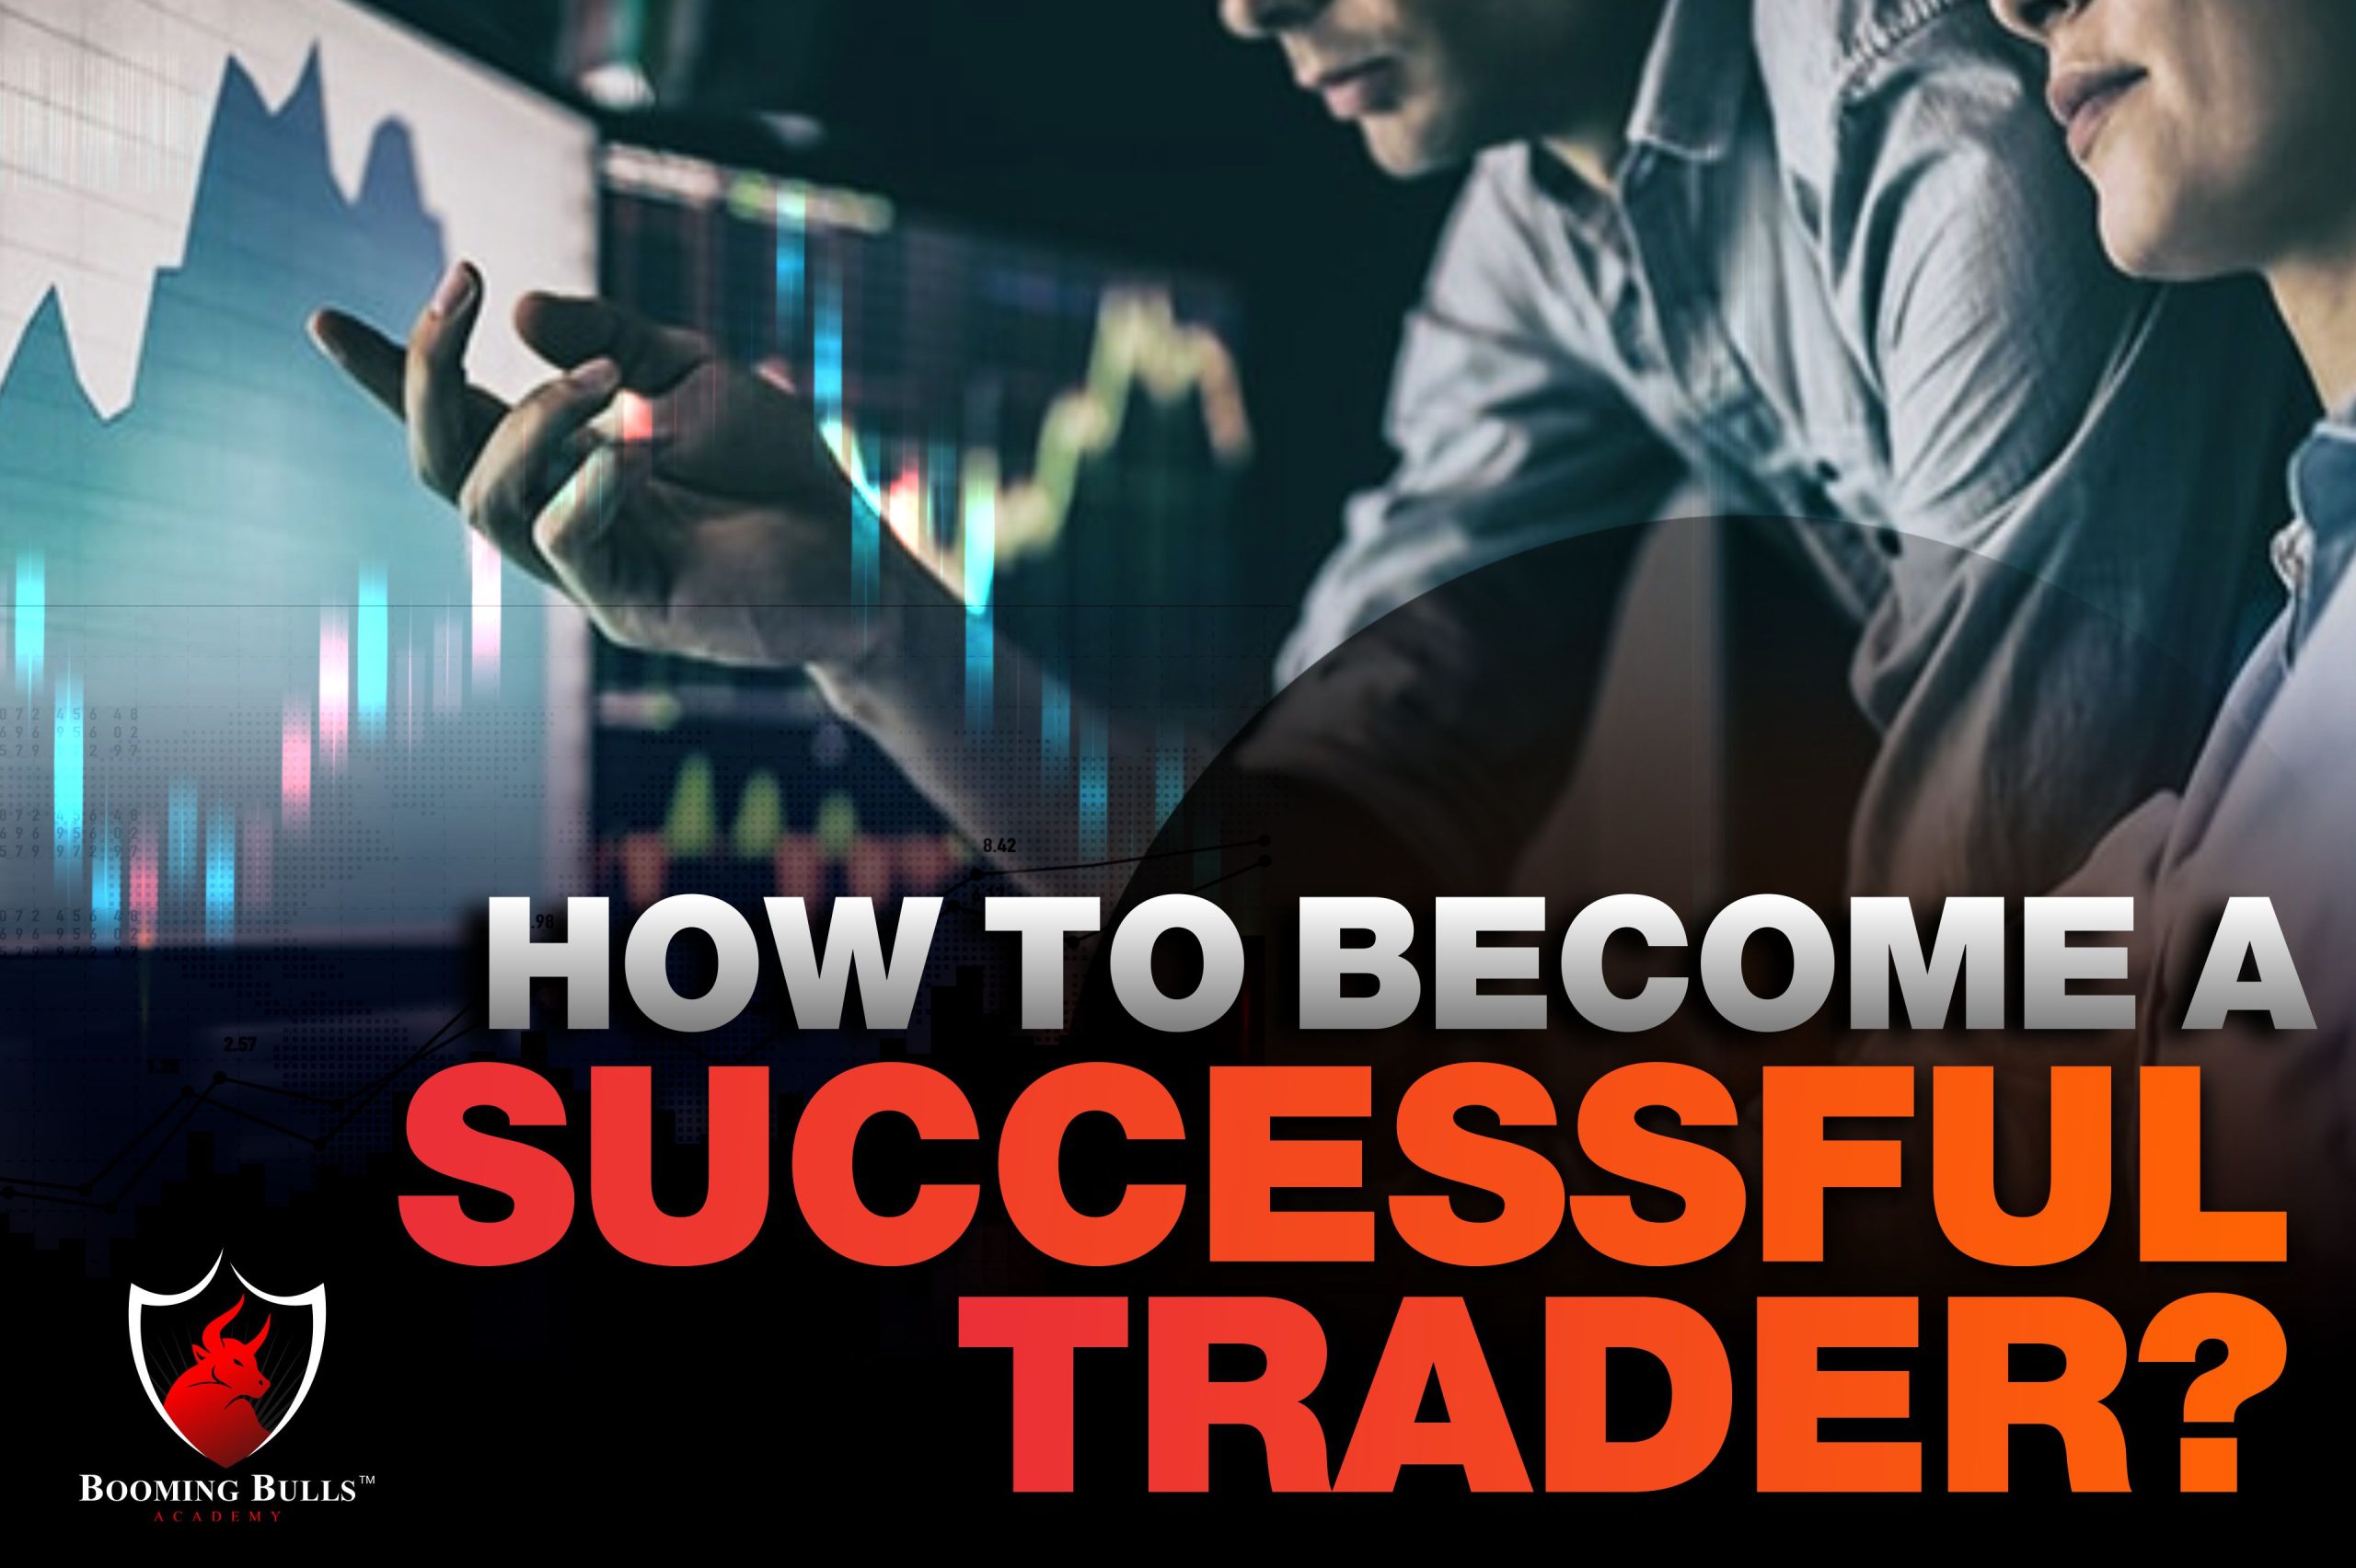 How To Become A Successful Trader?